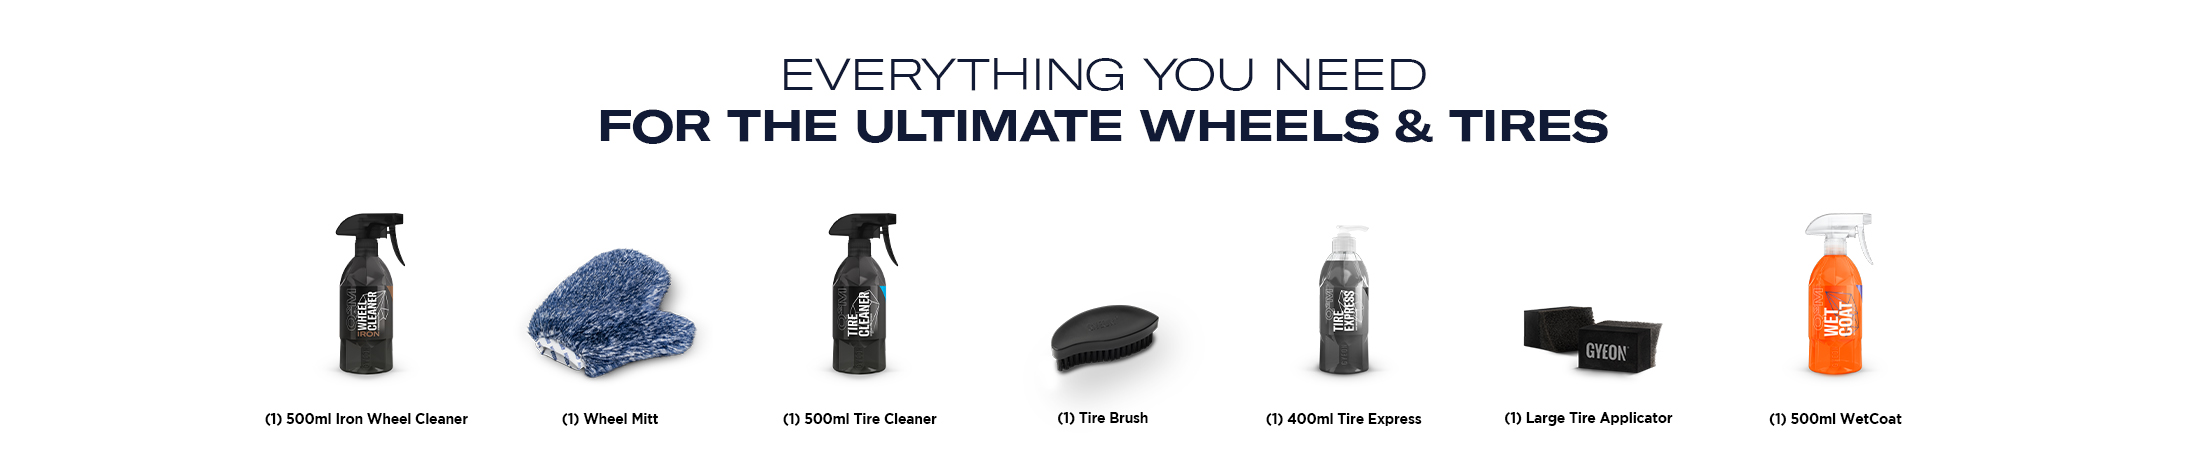 Gyeon Q²M Tire and Wheel Cleaning Kit - GY4702KT1